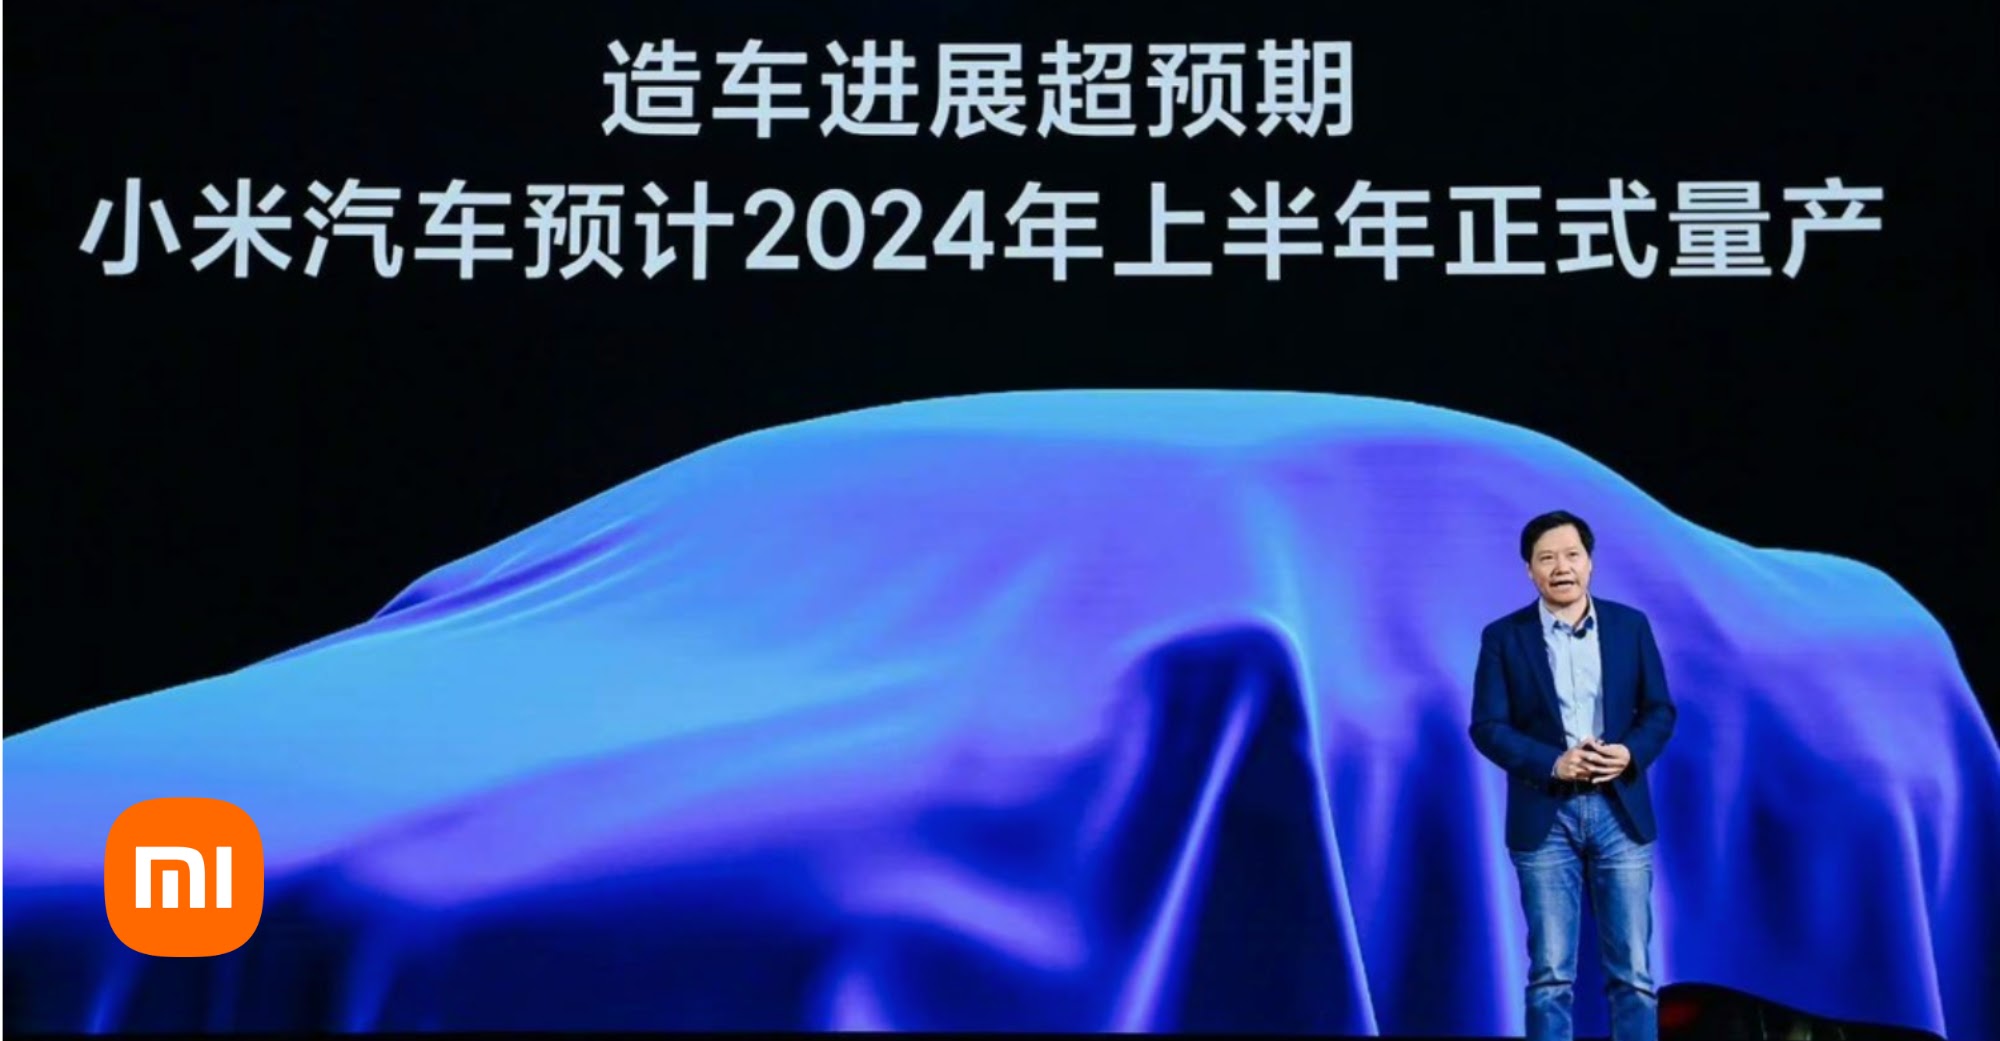 Lei Jun: Xiaomi is preparing to start mass production of its cars in the first half of 2024 Despite all the challenges and difficulties facing the global economy, the technology giant Xiaomi's plan to produce the first car in 2024 is moving faster than expected. This was confirmed by Lei Jun, the company's founder, chairman and CEO, who said that the winter test ended successfully and that the team behind the first Xiaomi car is growing rapidly and completing tasks faster than expected.    He said that everything is going according to plan and mass production of Xiaomi's first electric car is likely to start in the first half of 2024. To date, the company has invested more than $433 million in the automotive business, and has an ever-growing team of more than 2,300 people.    It is expected to start a new round of investment this year worth $2.8 billion, and plan to invest another $14 billion in the next five years.    During the company's Investor Day, the CEO also suggested that Xiaomi should look into robotics technology as well because the development of this technology will accelerate the autonomous driving capabilities of cars and also speed up the manufacturing process.